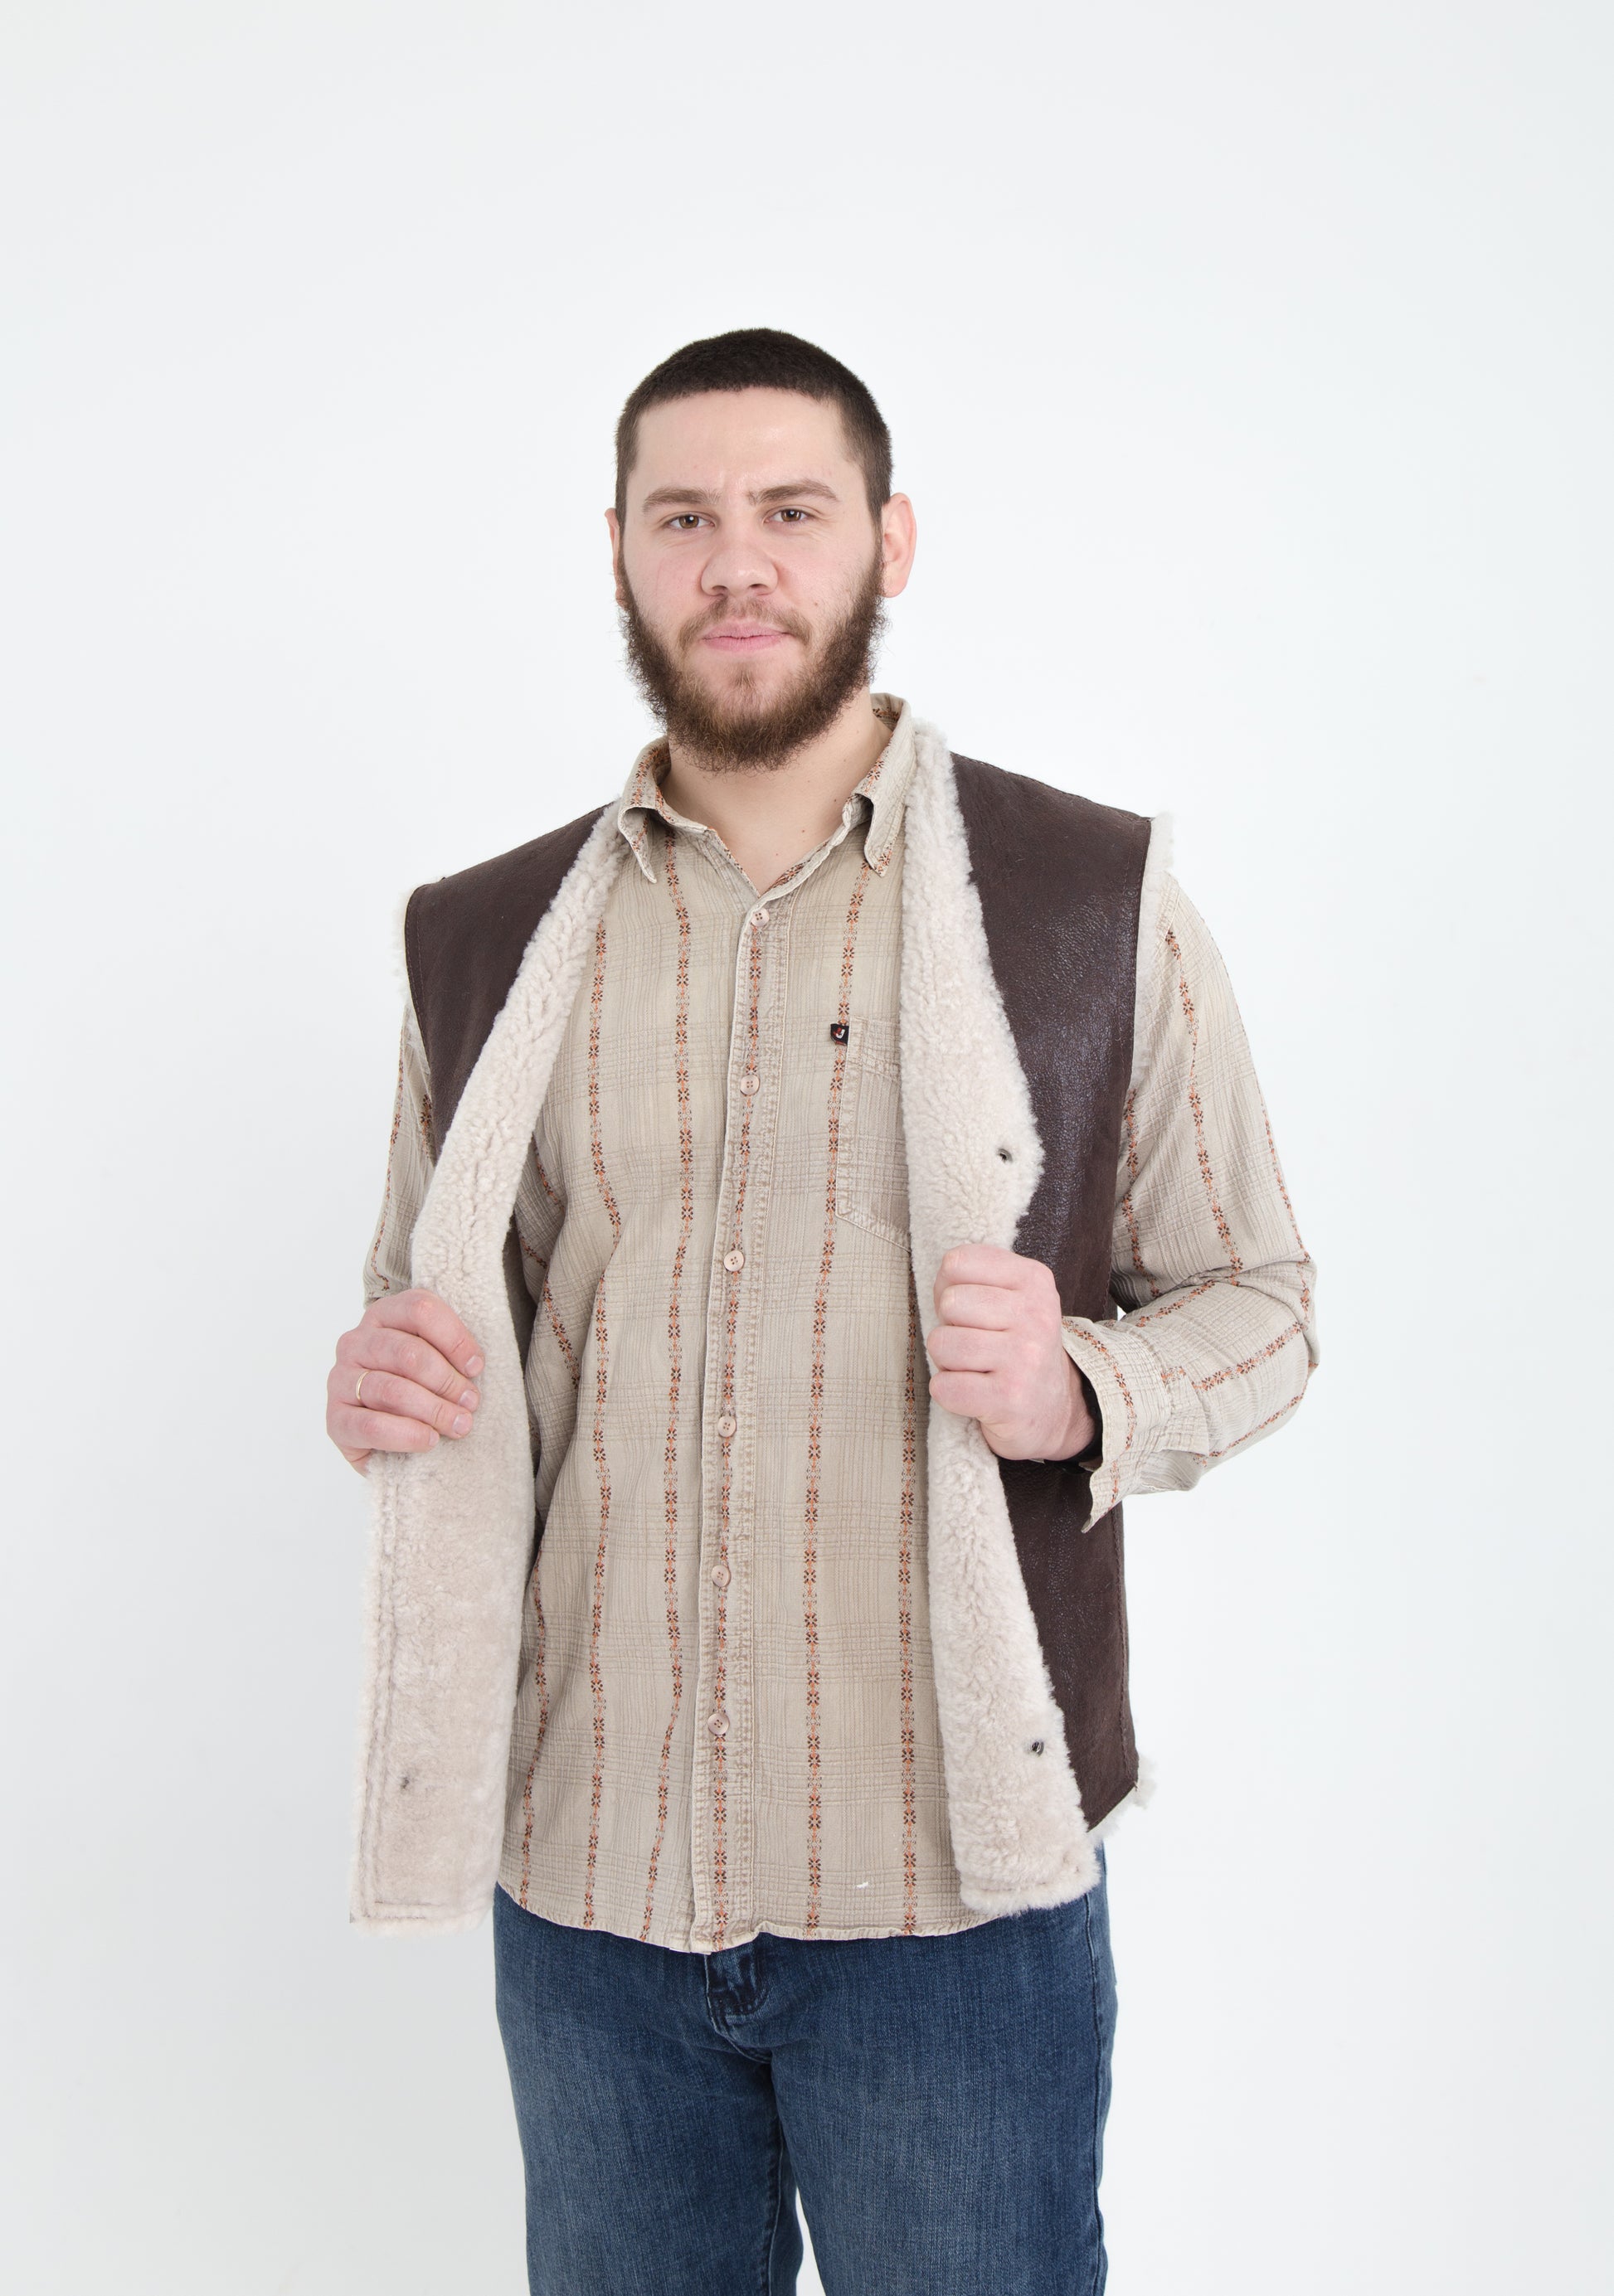 Cowboy Men's Thin Sheepskin Vest with Contrasting Light Fur Lining Front Button Closure